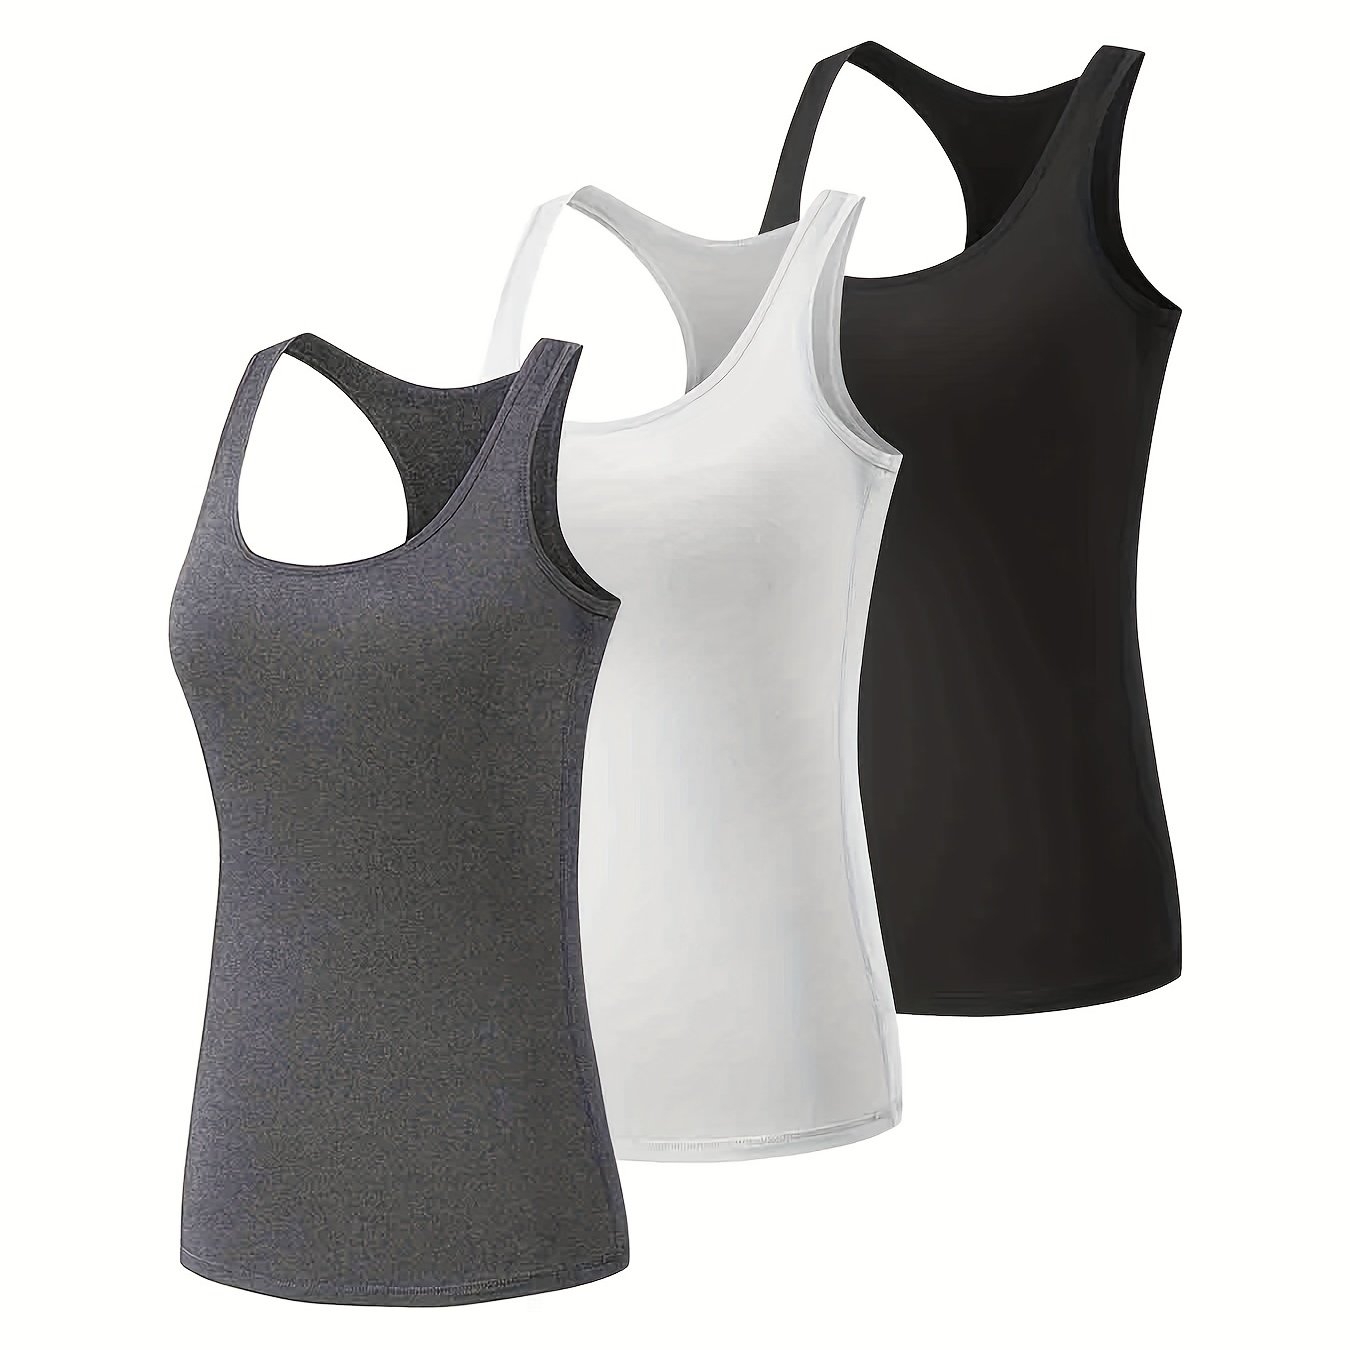 Workout Athletic Tank Tops for Women Pack, Black/White Striped, Small - $14  New With Tags - From Dustin